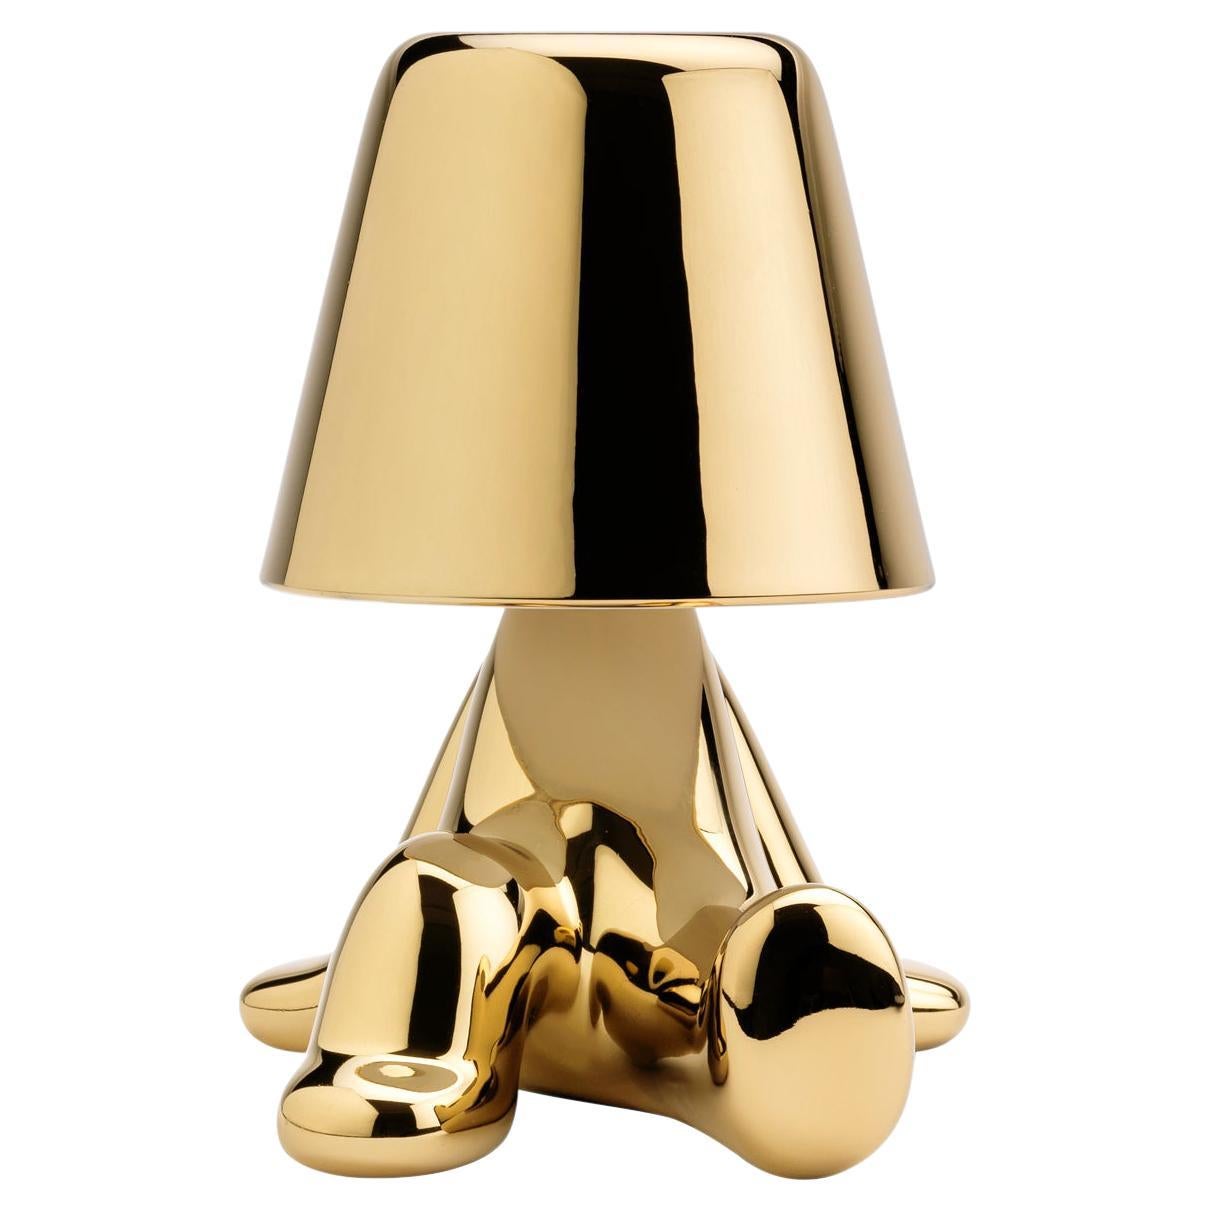 Golden Brothers Bob LED Lamp, Designed by Stefano Giovannoni, Made in Italy